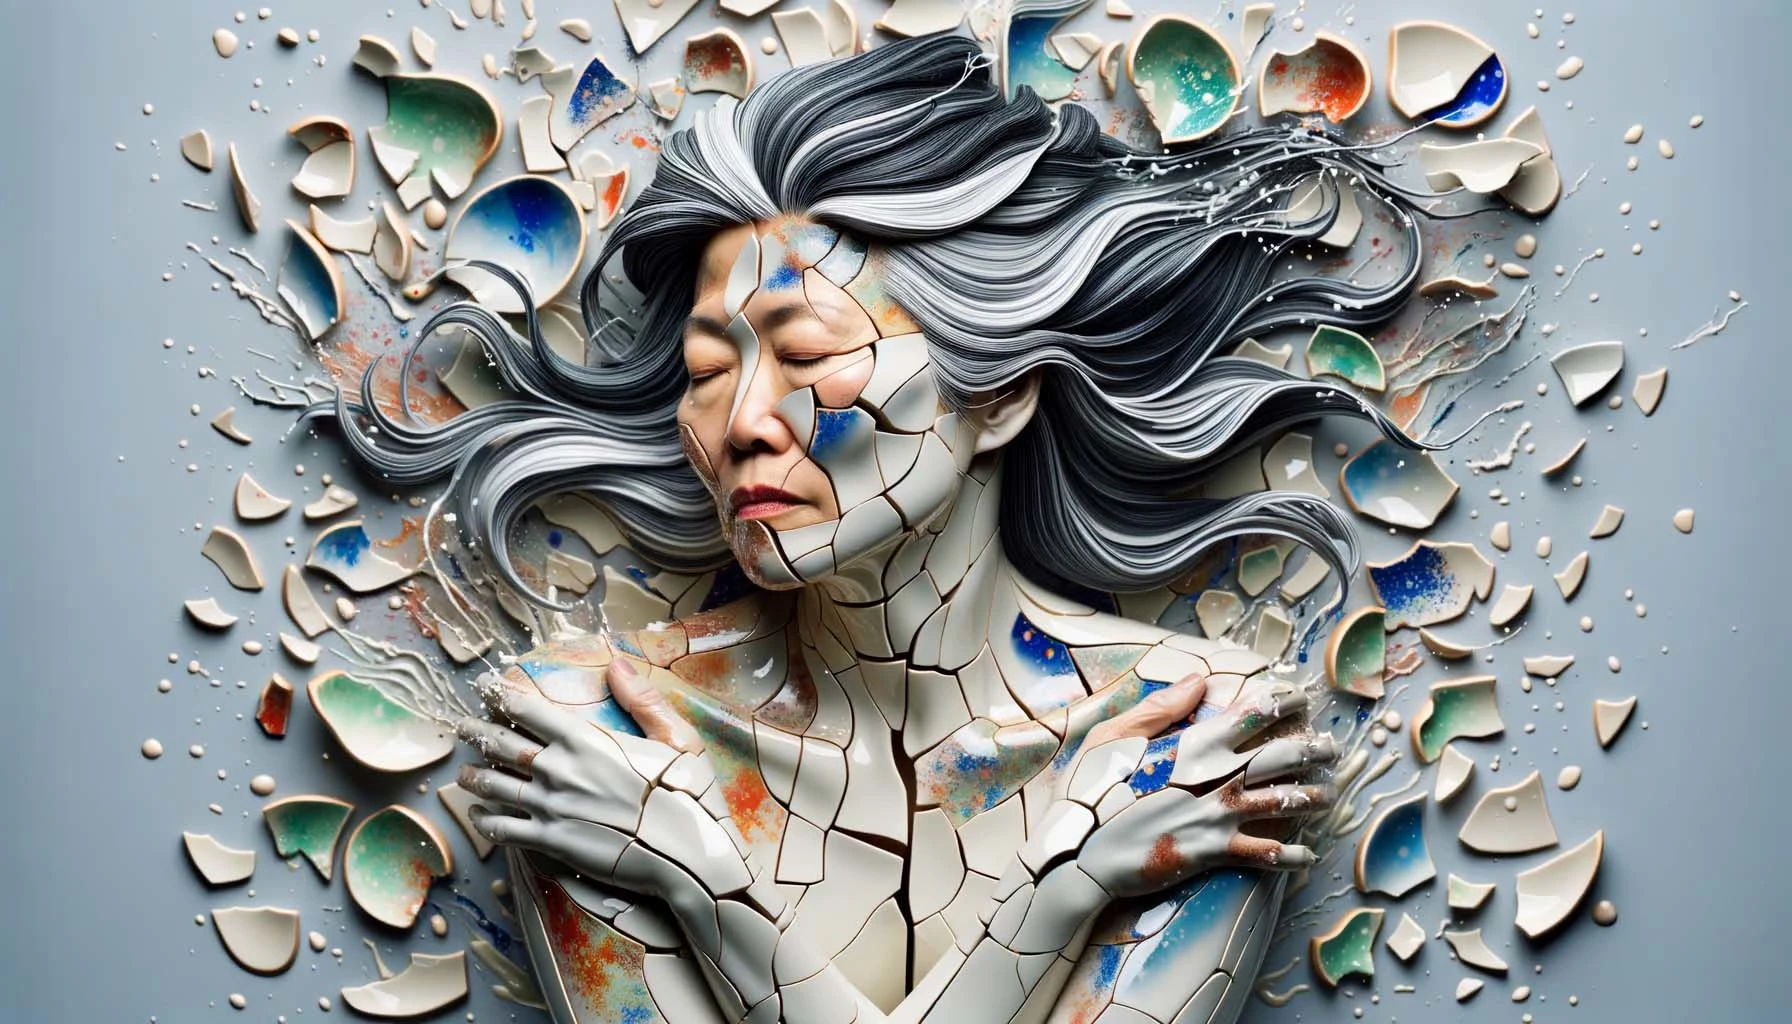 Sculptural artwork of a woman's face constructed from paper and ceramic shards, capturing a moment of disintegration with flowing hair and vivid blue and white fragments.